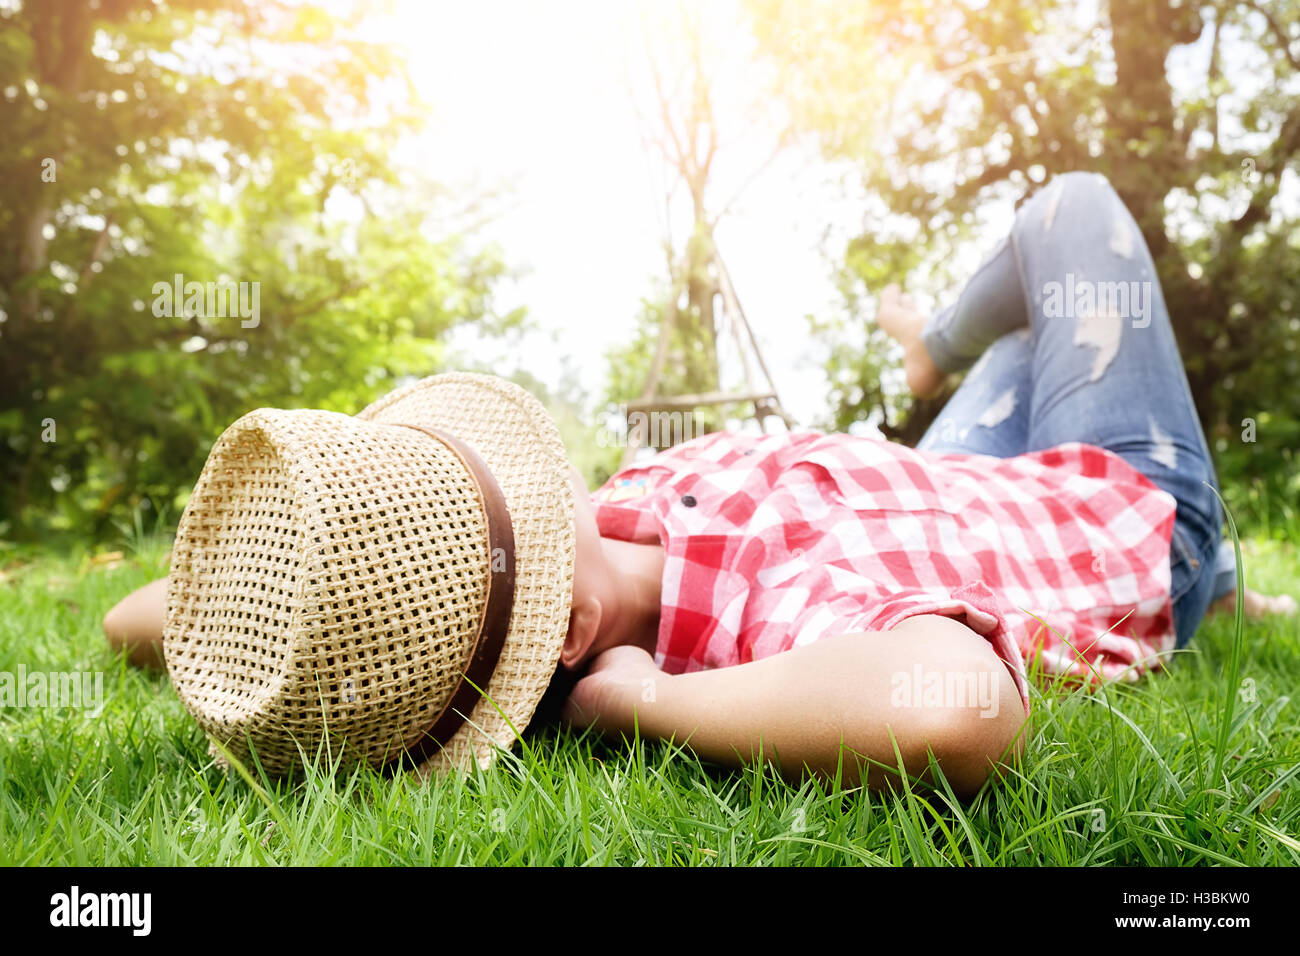 relax,freedom,girl, grass, green, happiness,lifestyle,outdoor, park,hipster Stock Photo